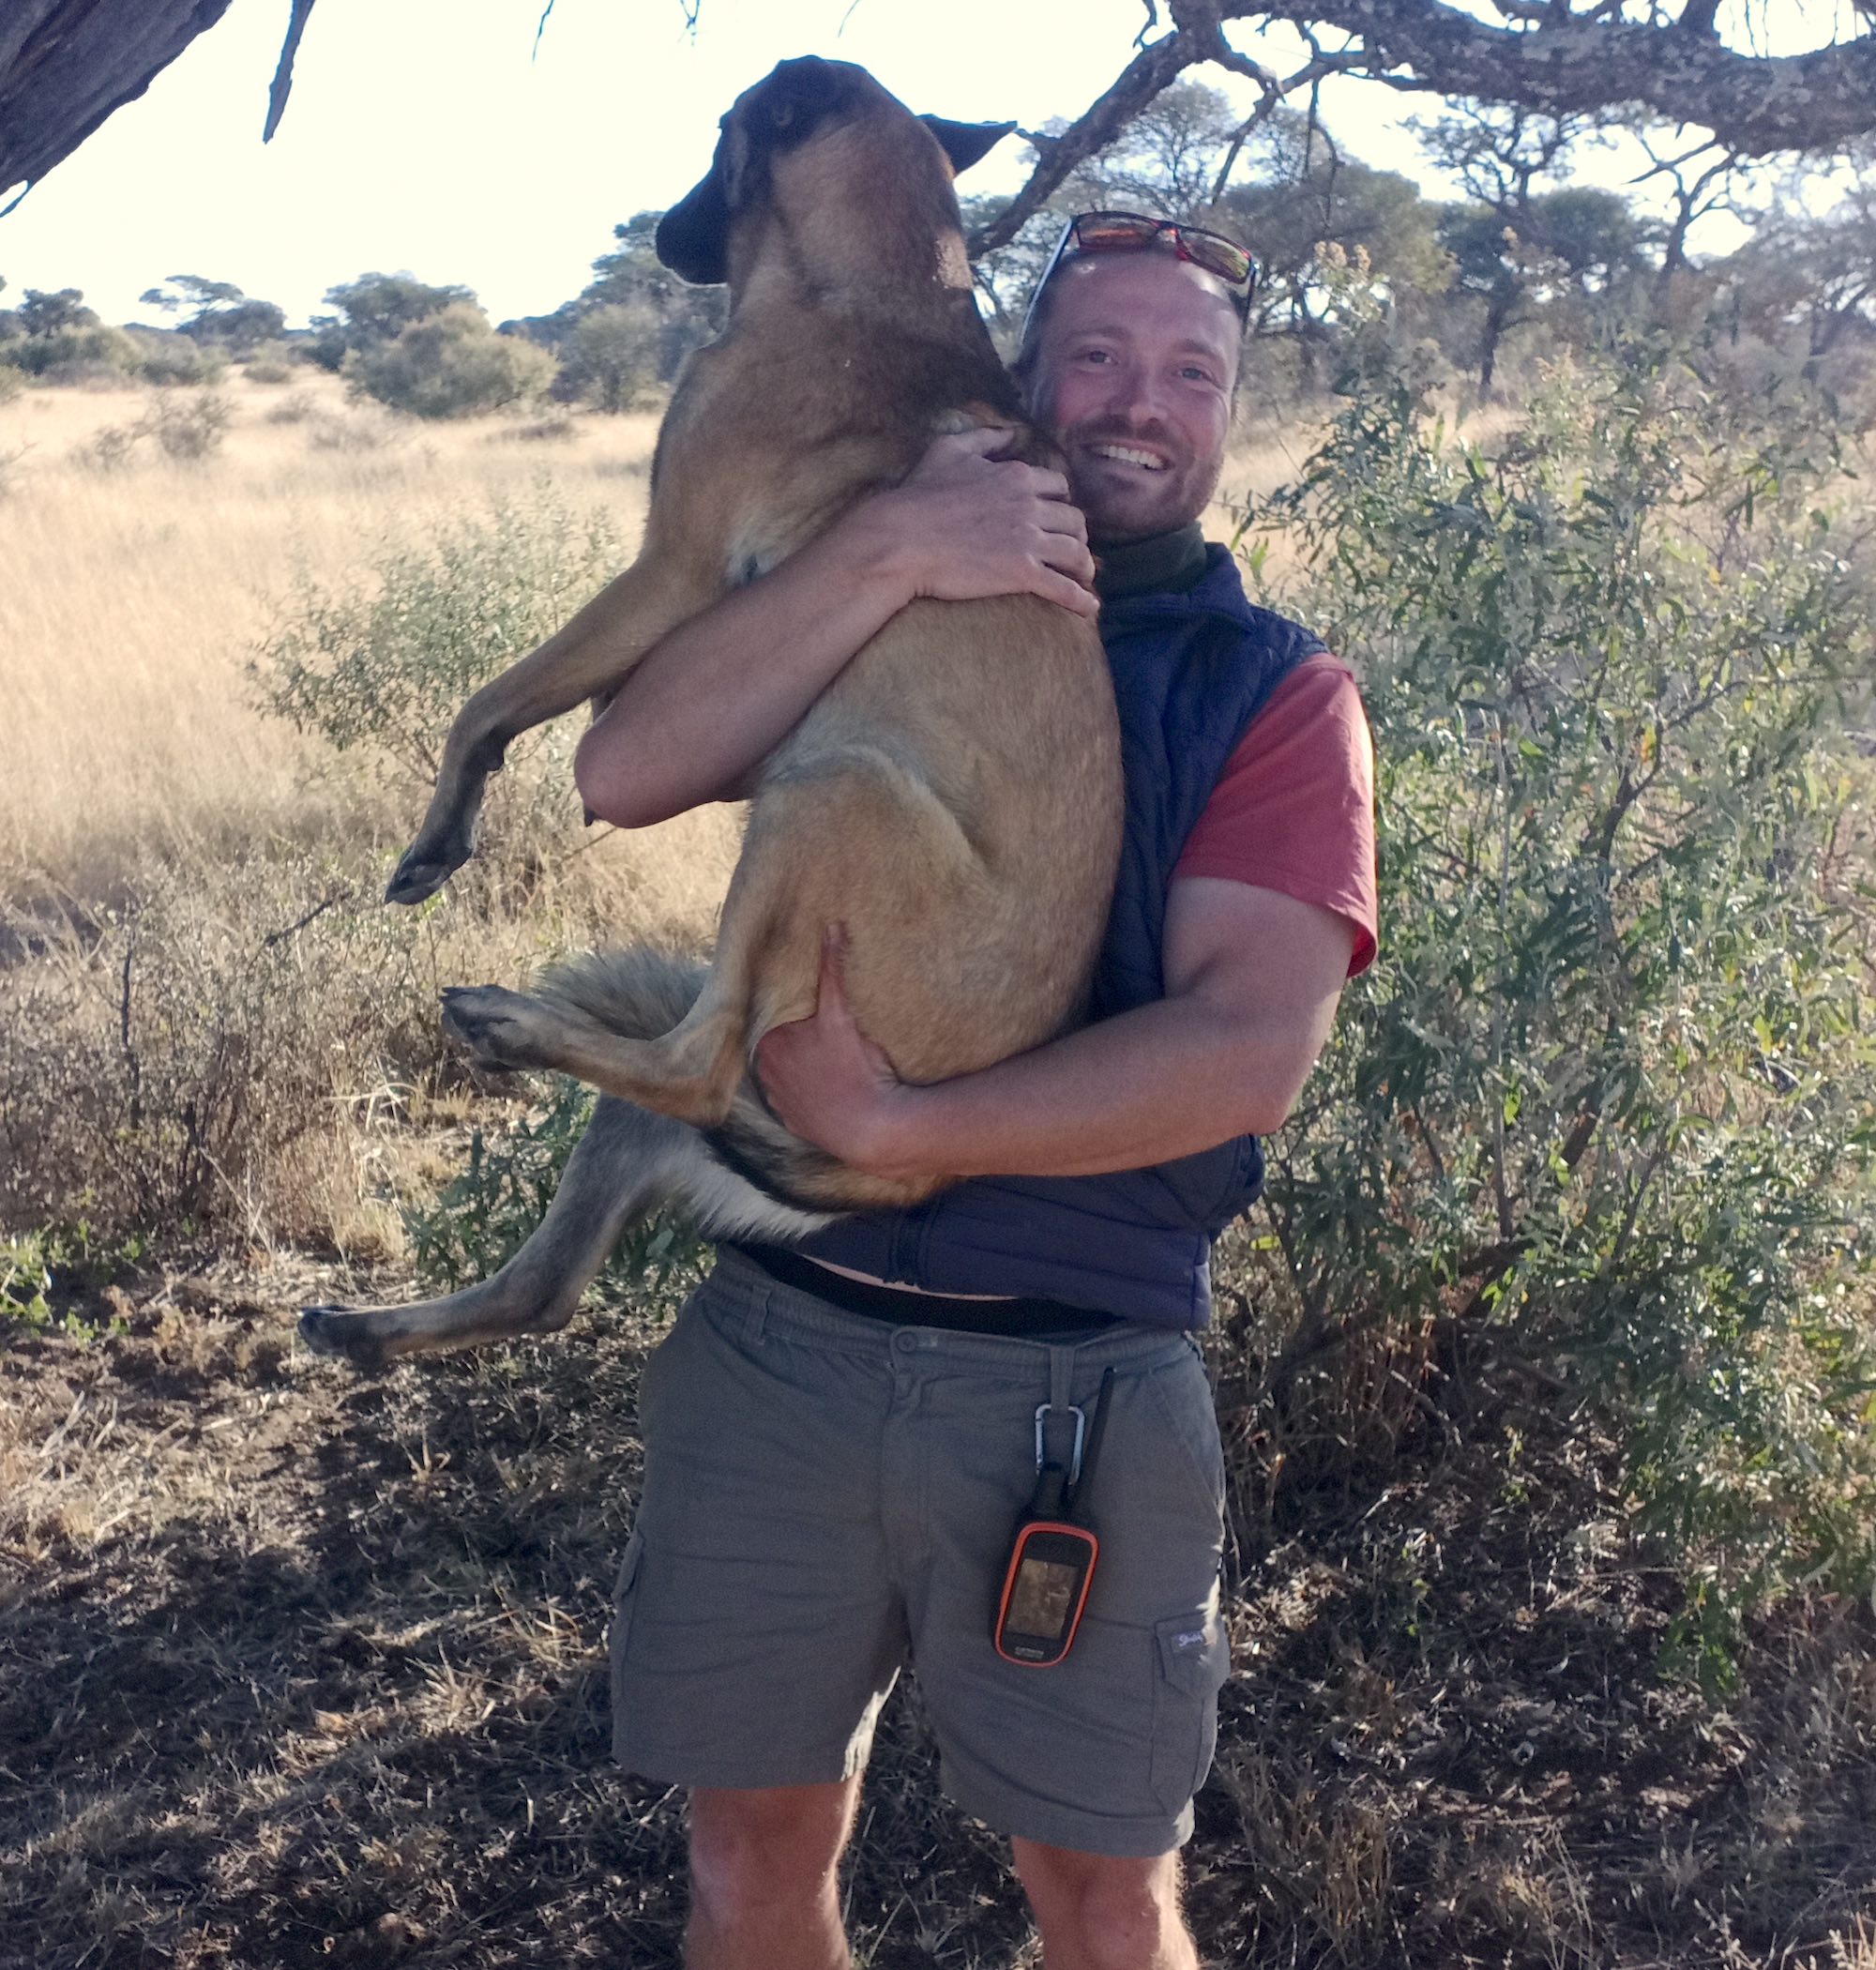 A man holds a Belgian Malinois dog in his arms.